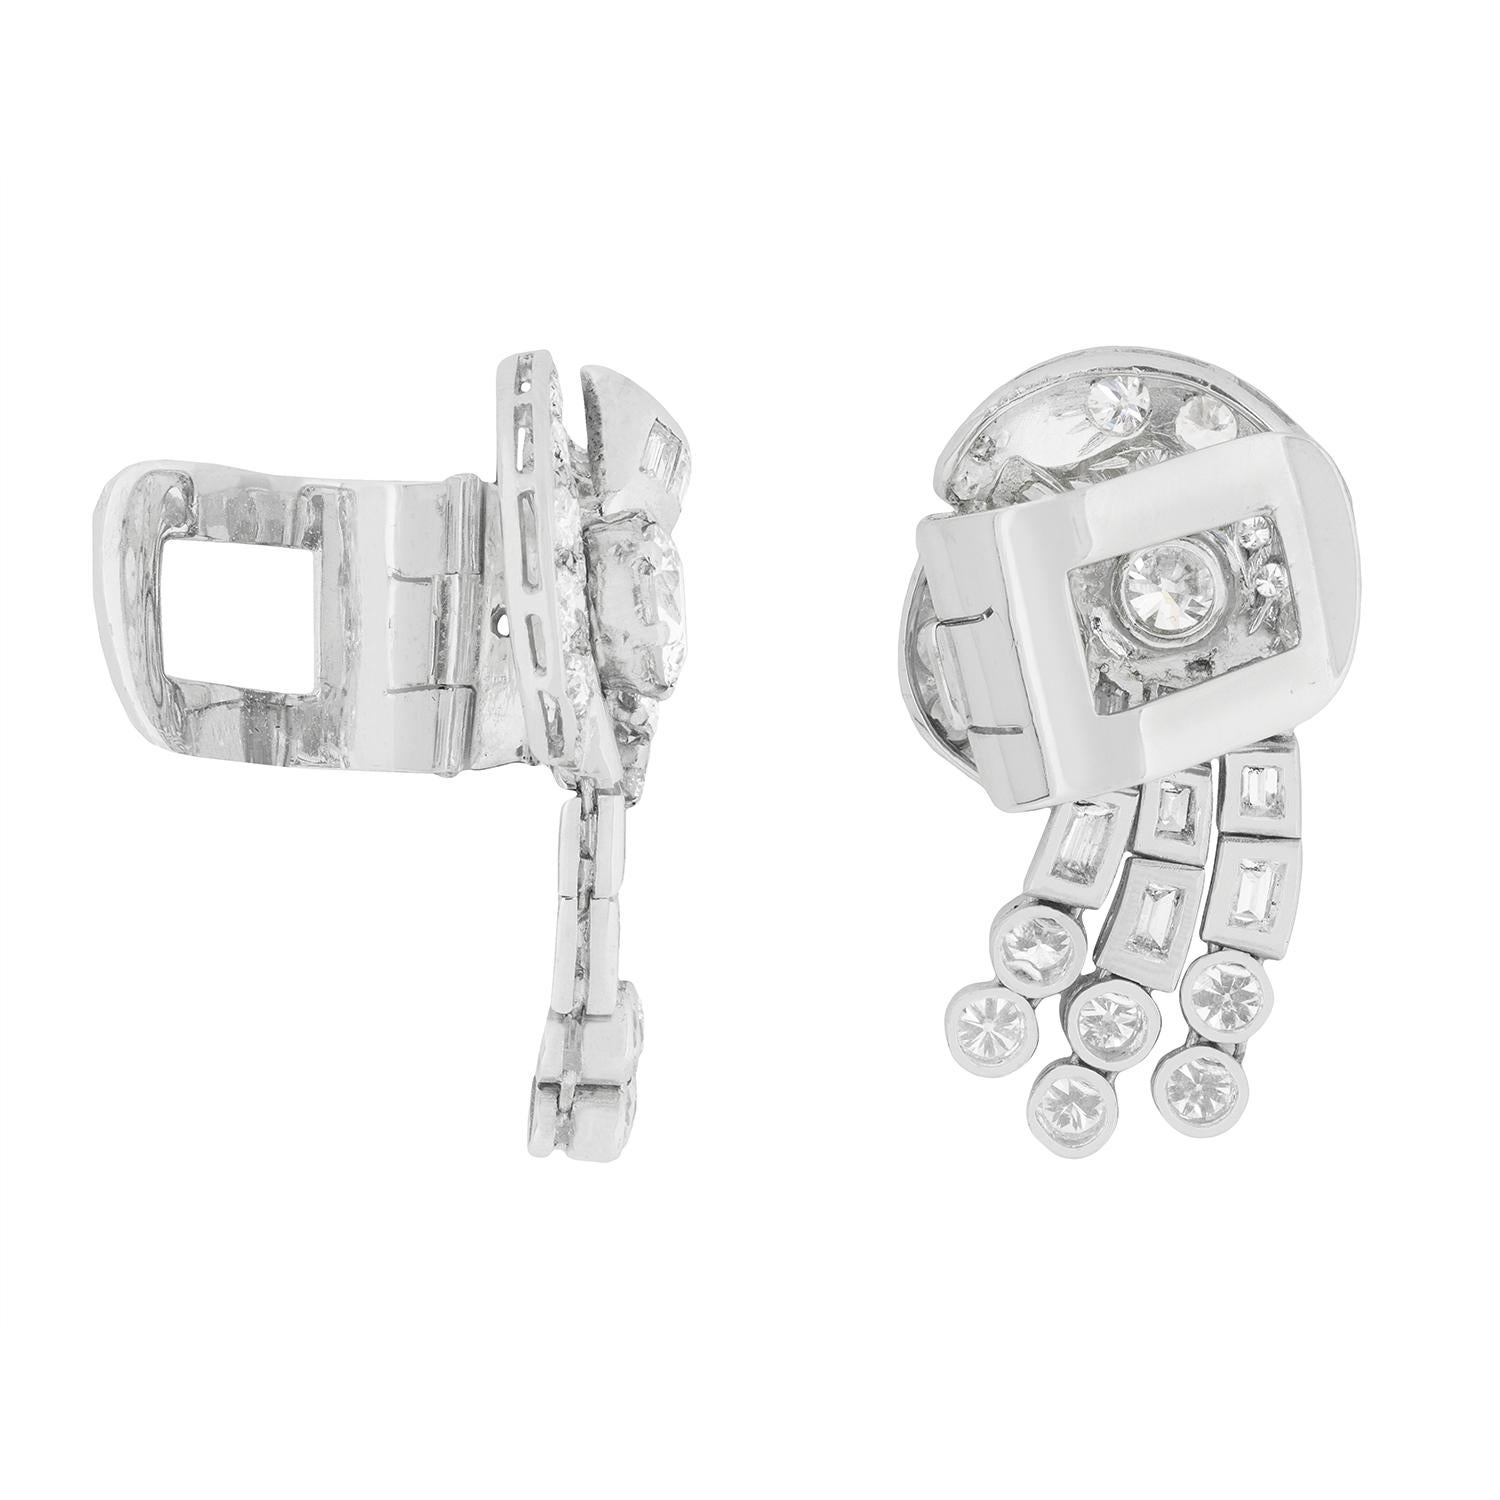 These absolutely breathtaking earrings date back to the 1930s and feature an array of transitional cut and baguette cut diamonds, all perfectly set within platinum. On each earring, there is a centre round transitional cut diamond with a weight of